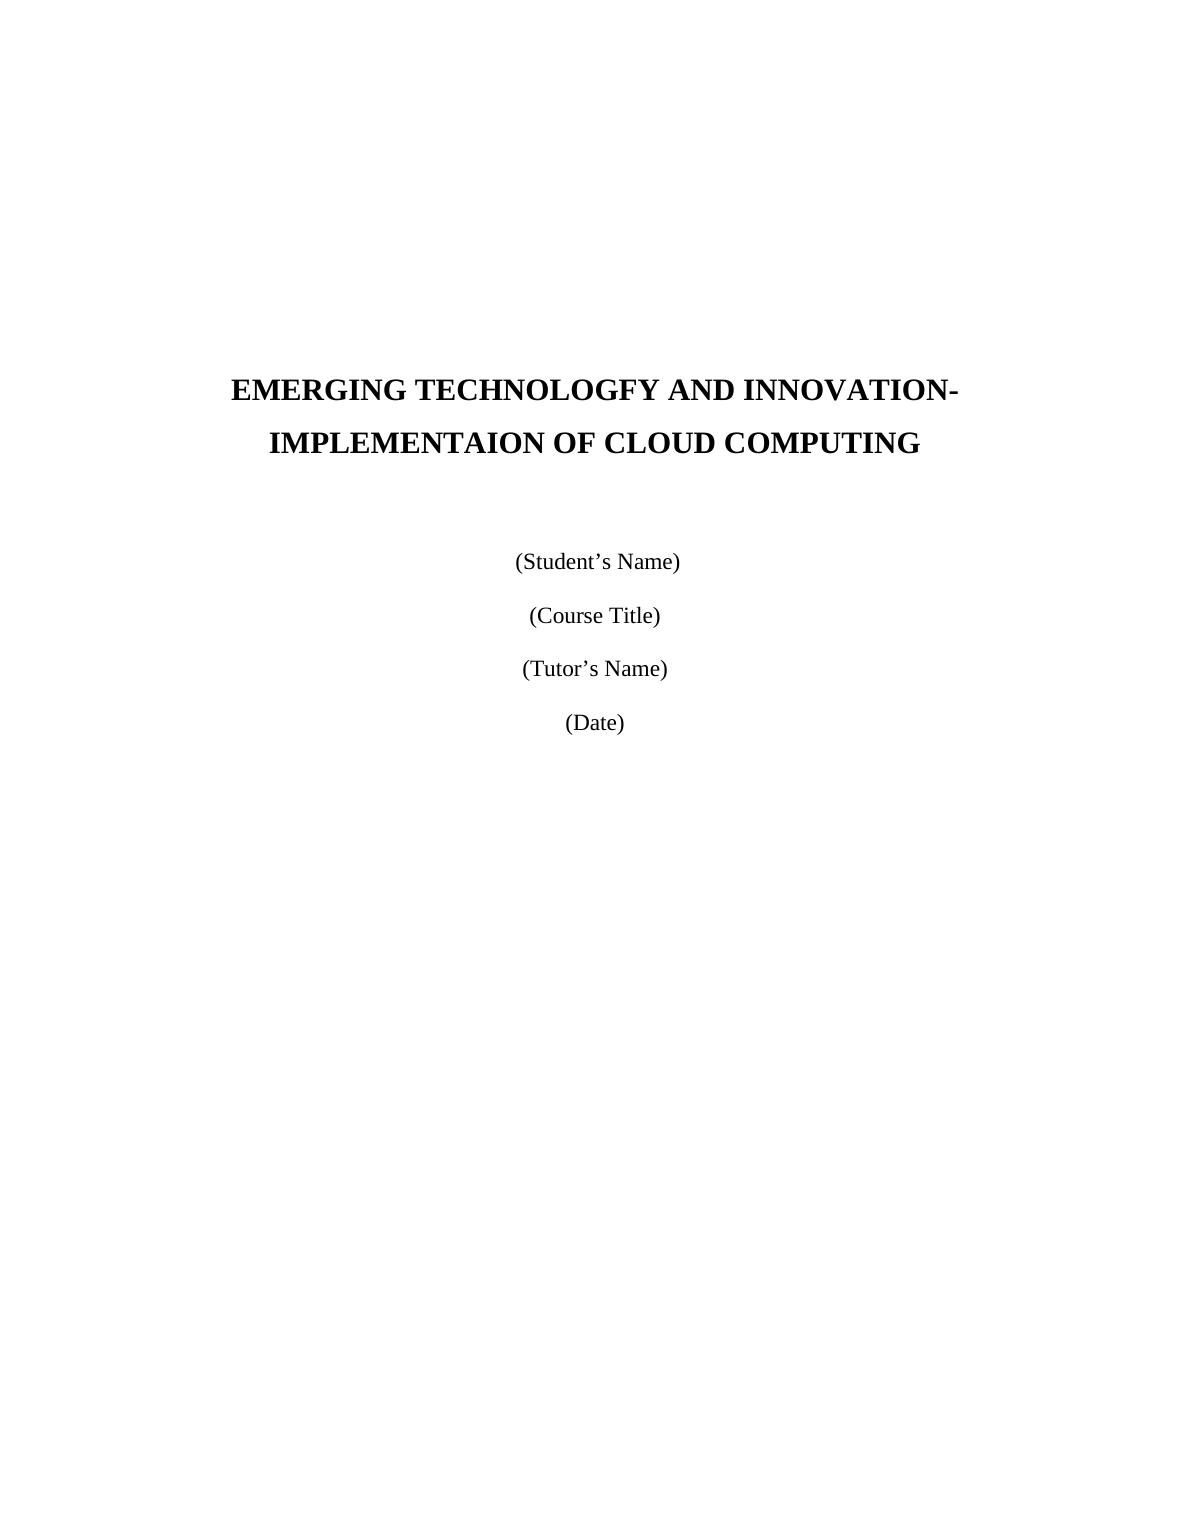 Emerging Technology And Innovation Implementation_1